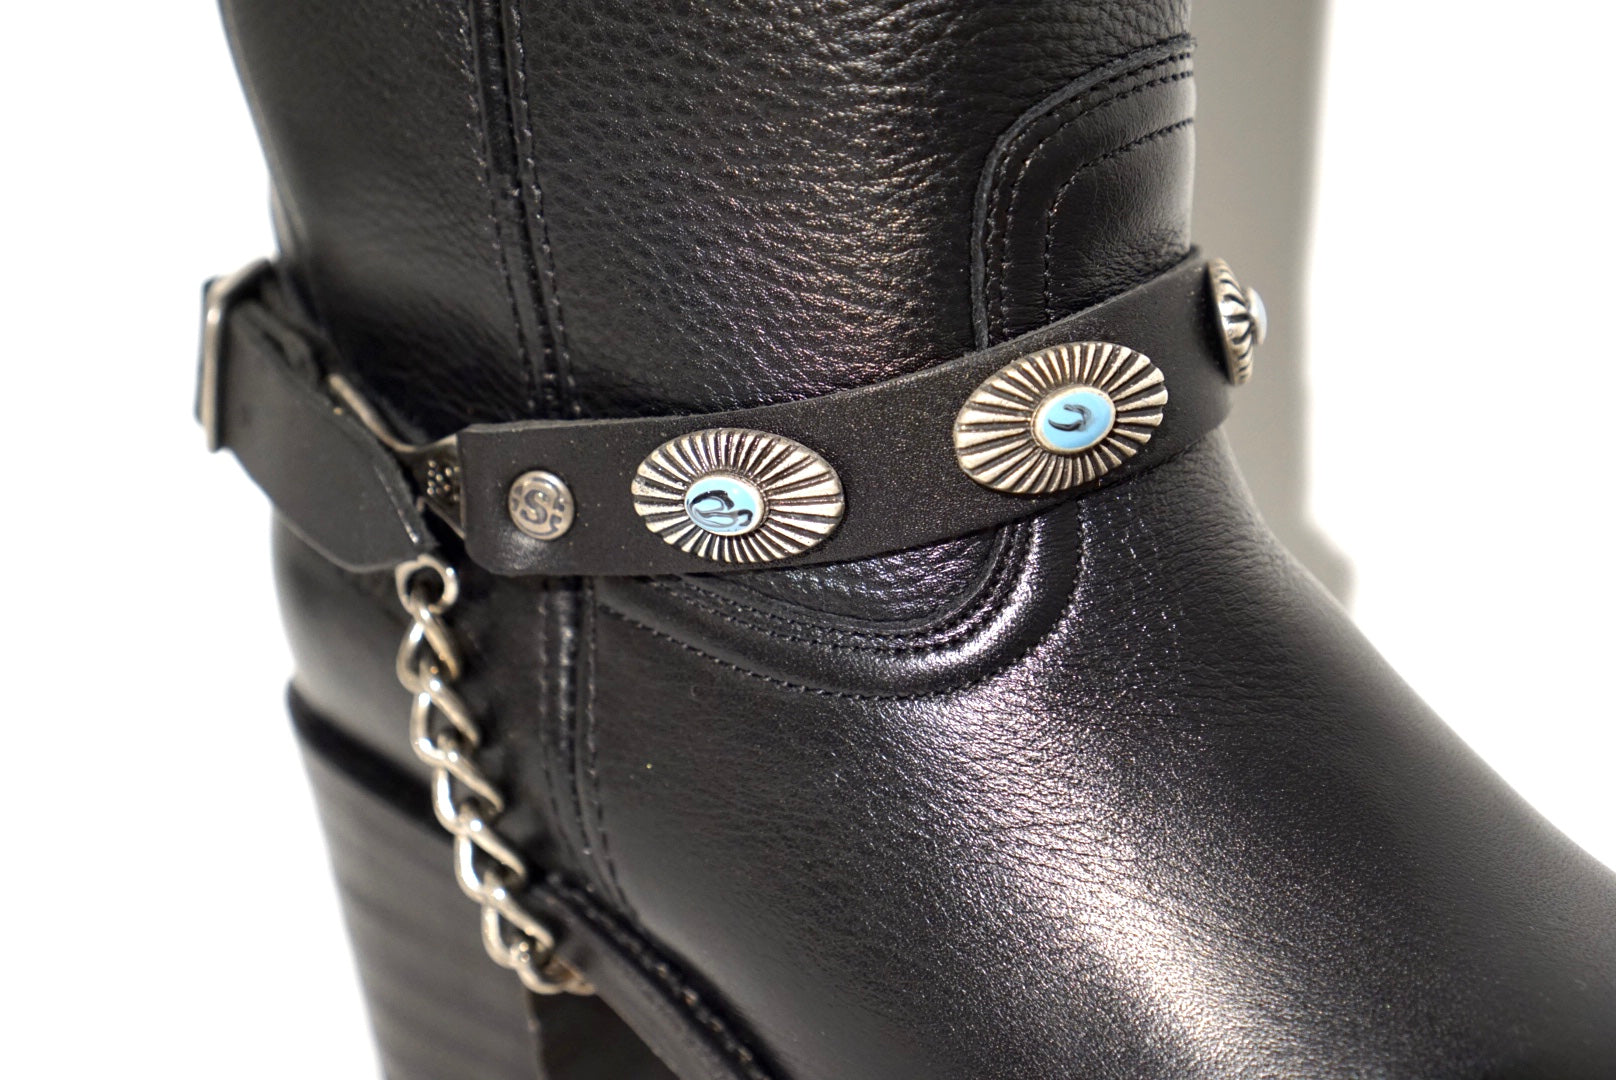 Sendra spurs - black with turquoise accents